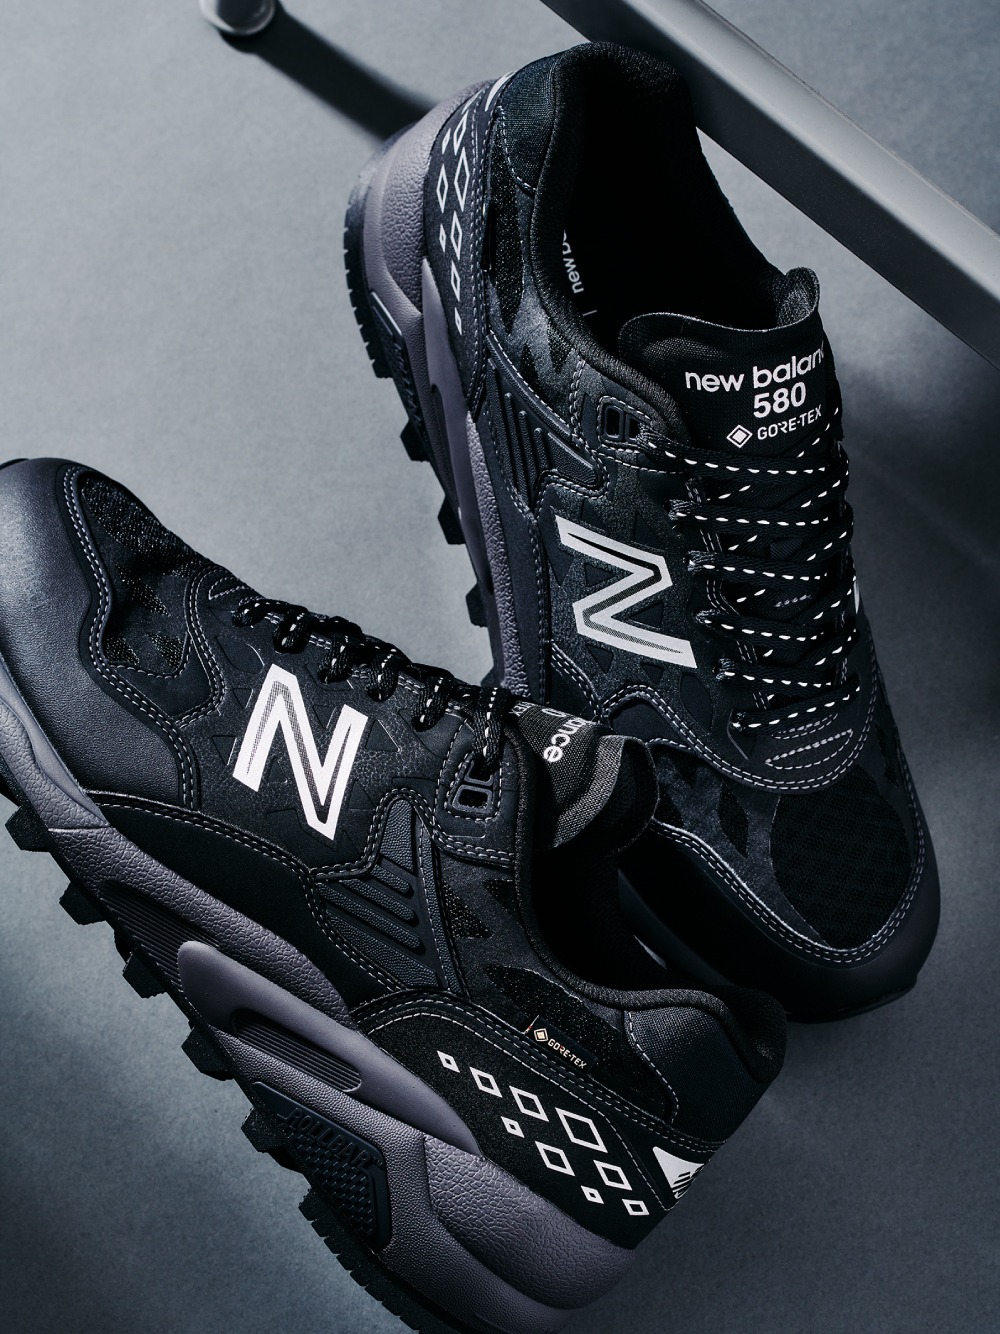 These GORE-TEX New Balance 580s Epitomize Japanese Street Culture